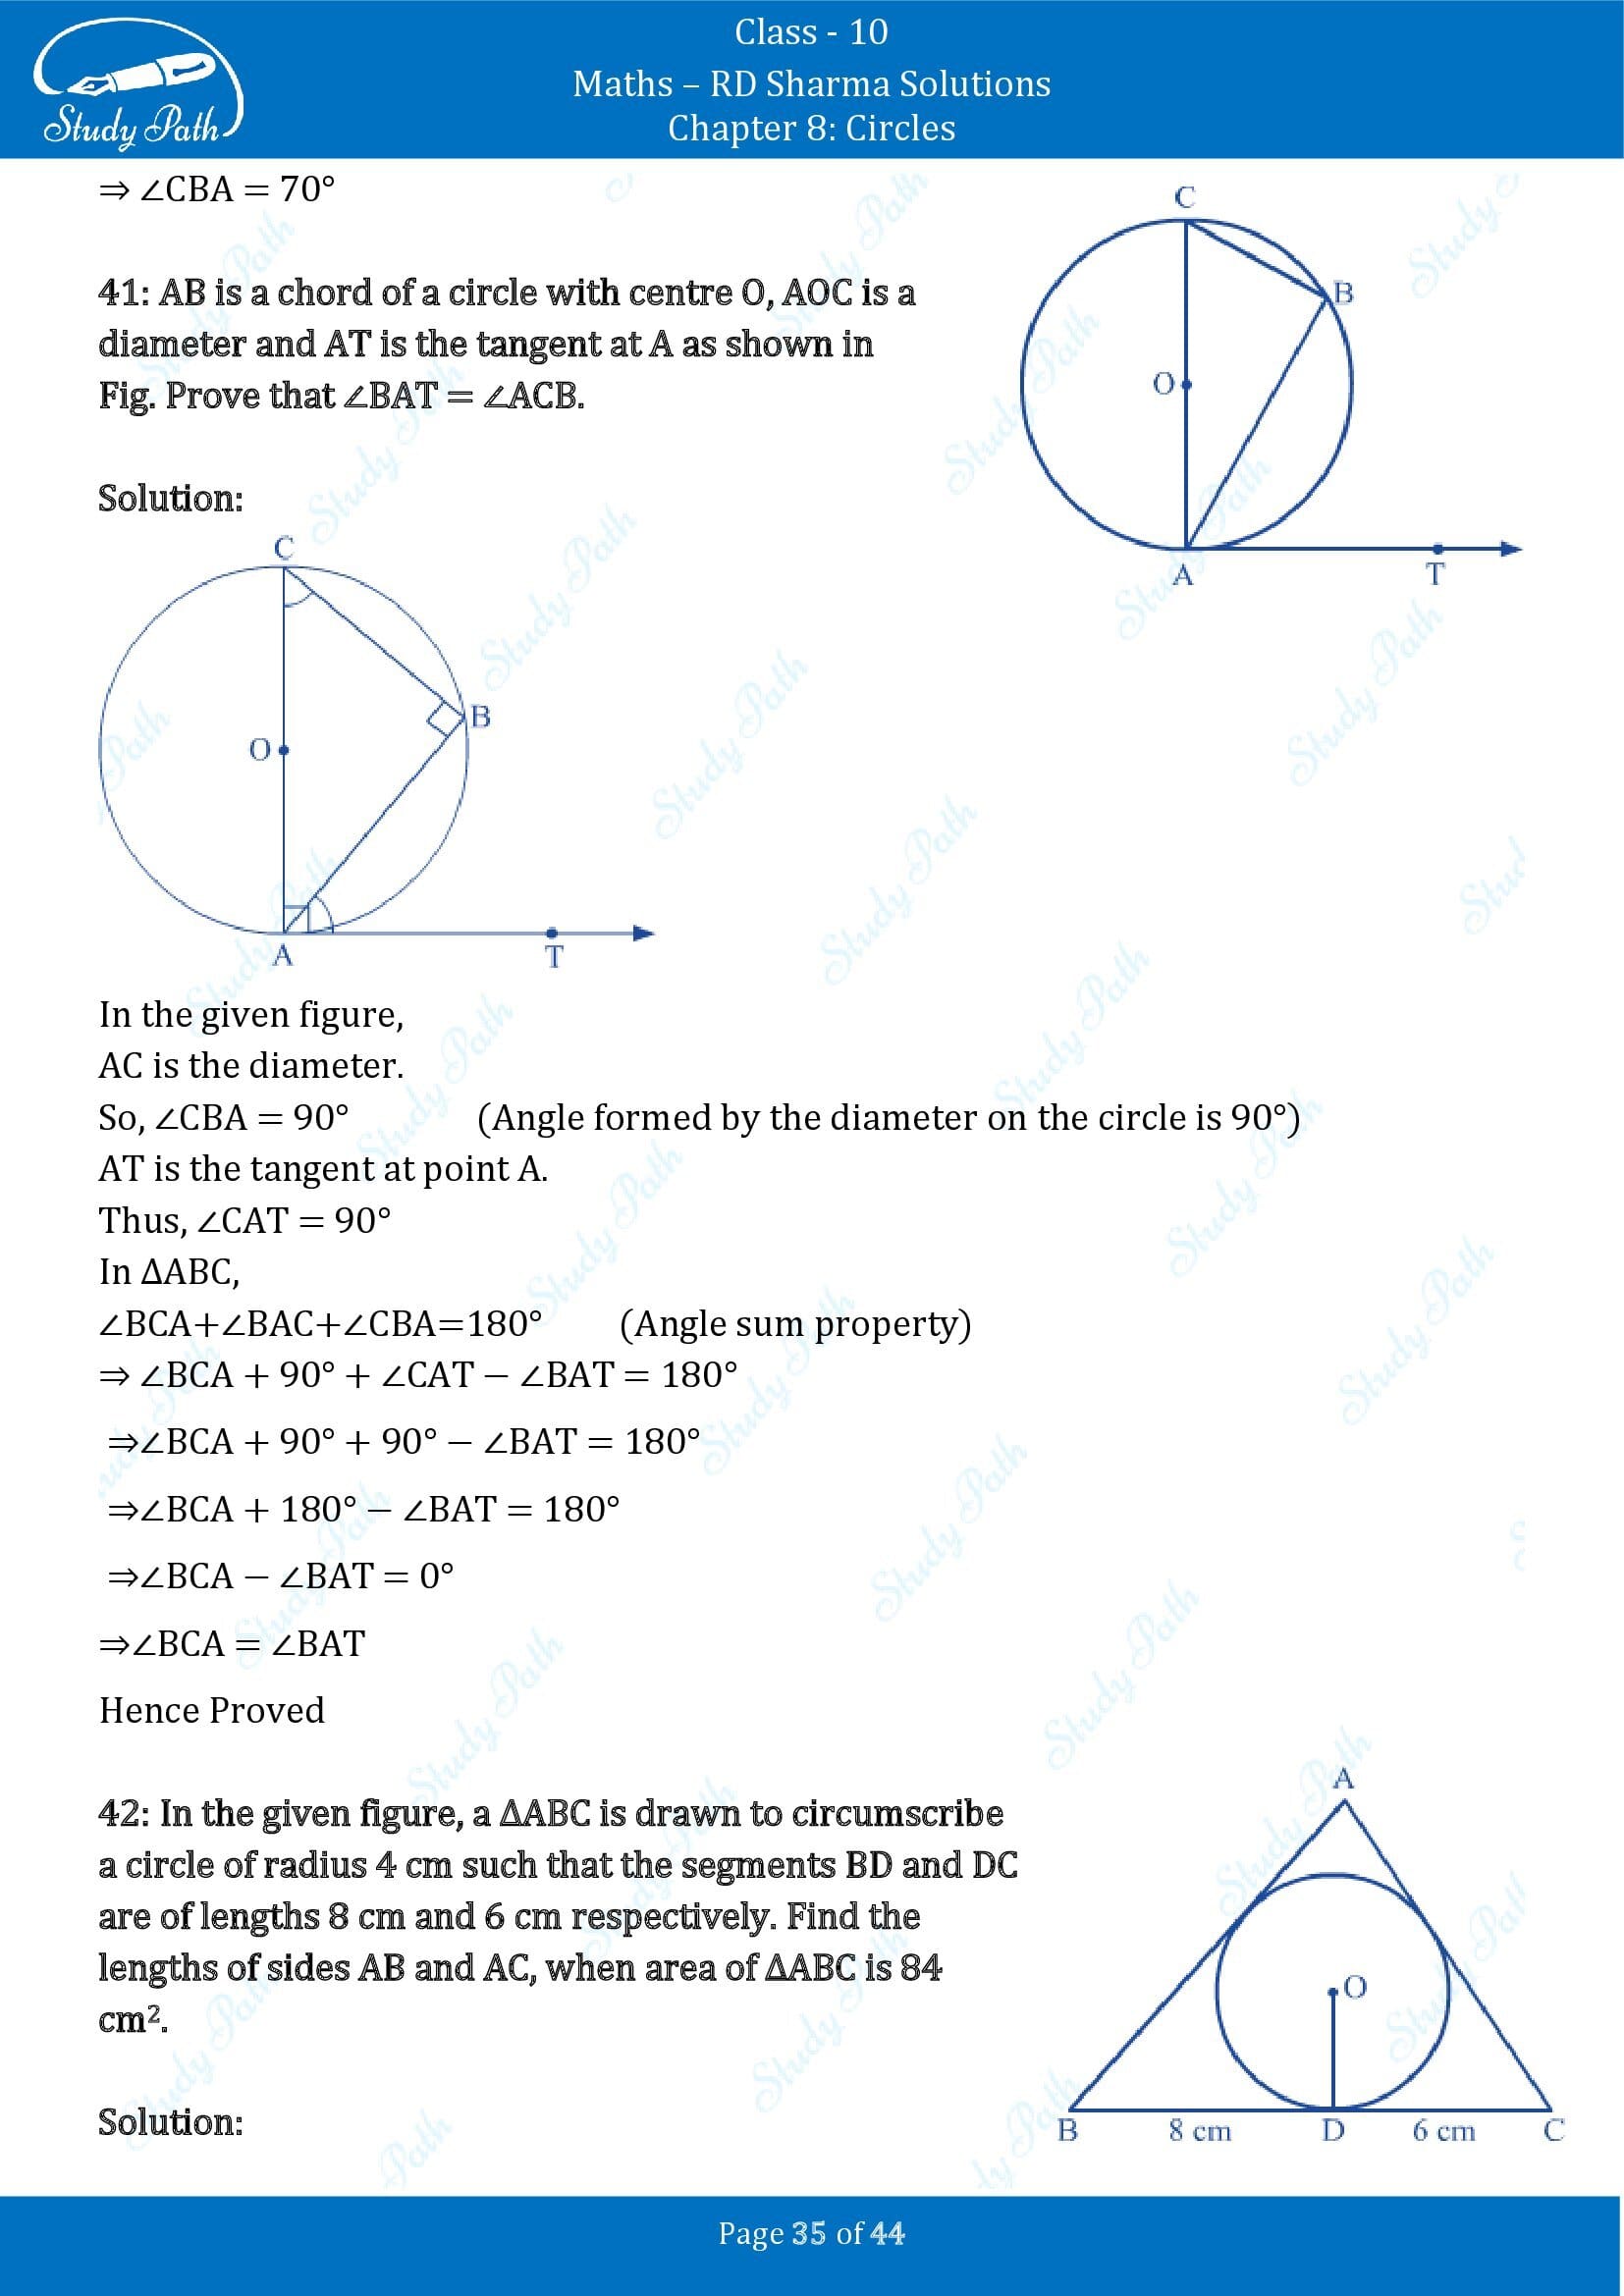 RD Sharma Solutions Class 10 Chapter 8 Circles Exercise 8.2 00035